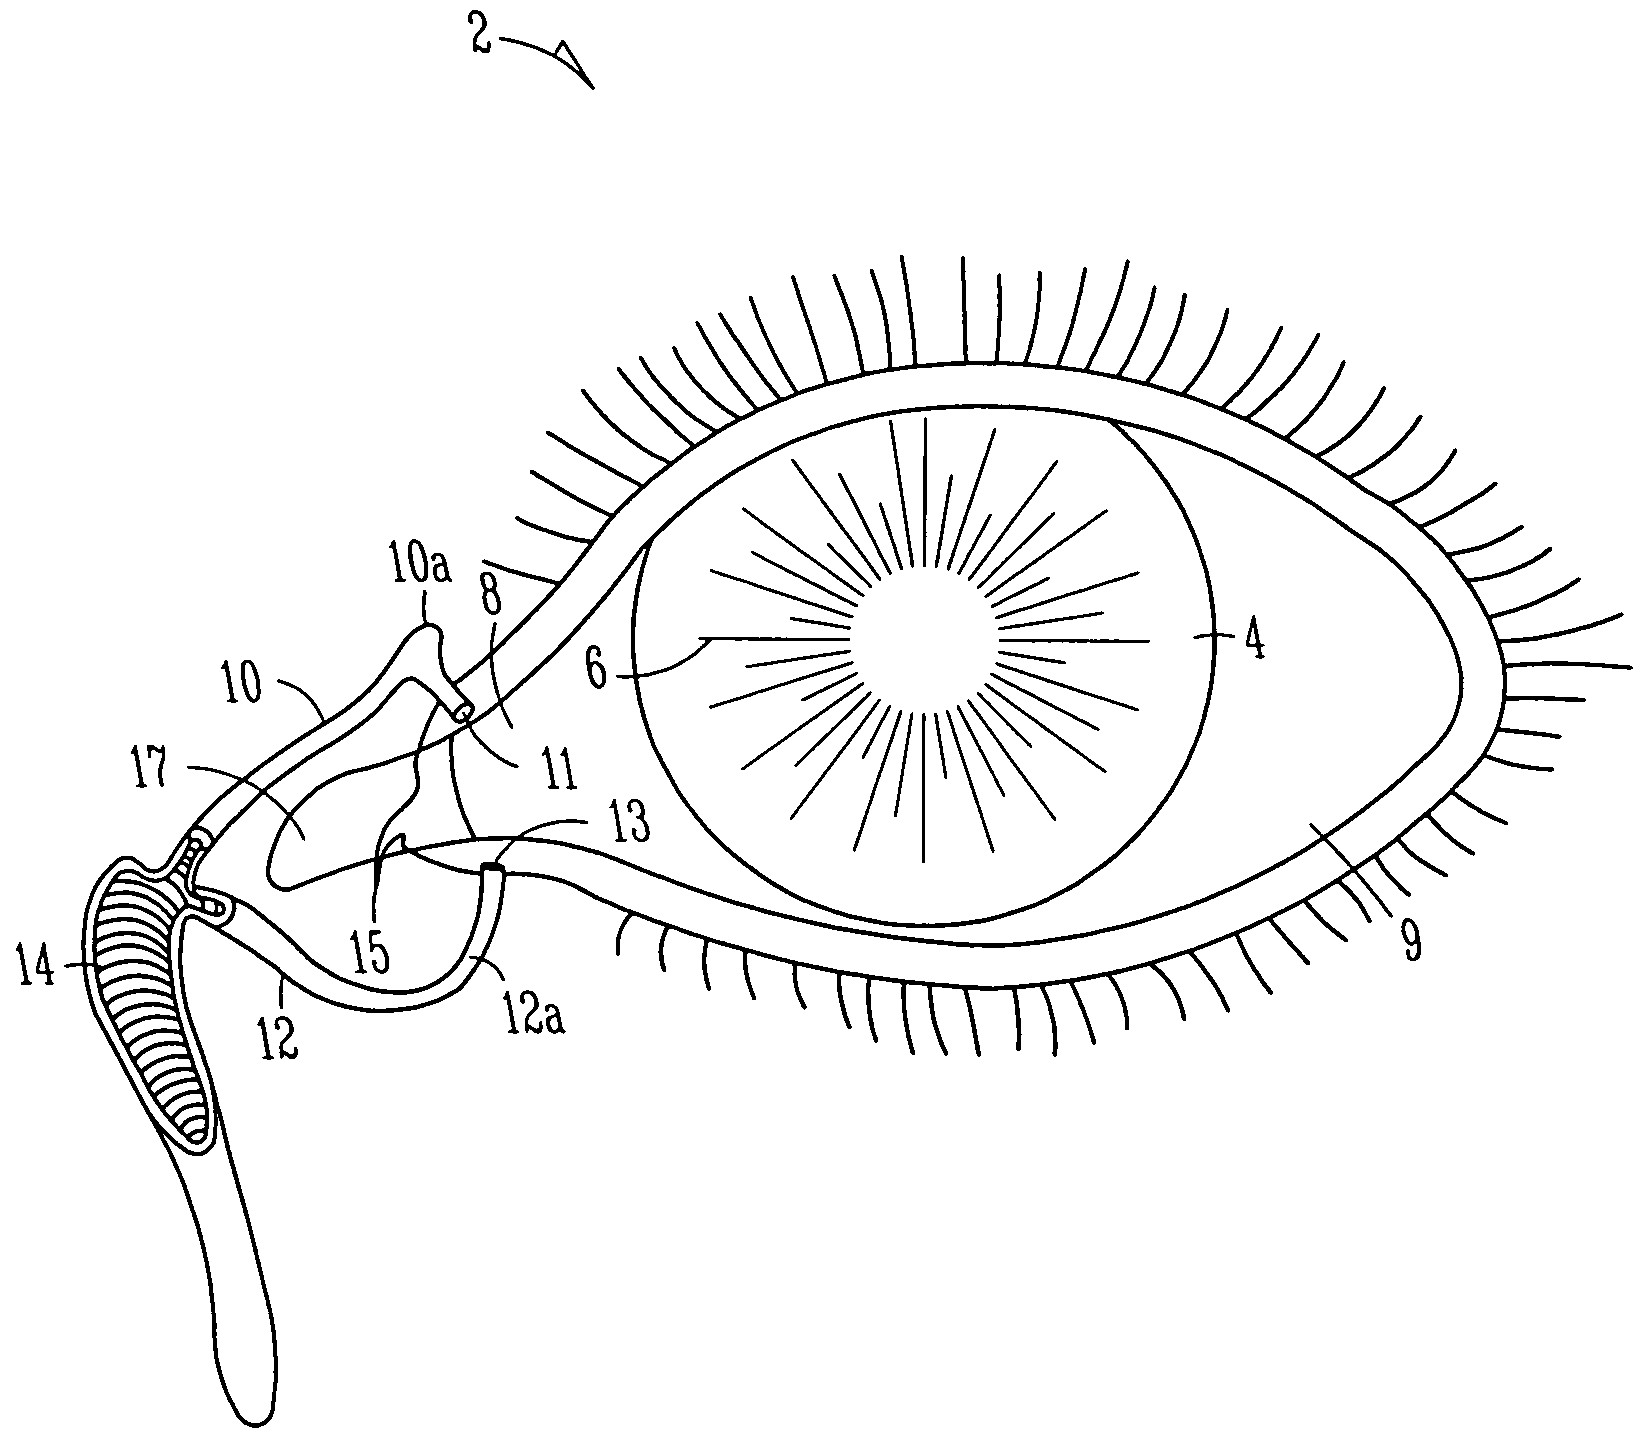 Insertion and extraction tools for lacrimal implants